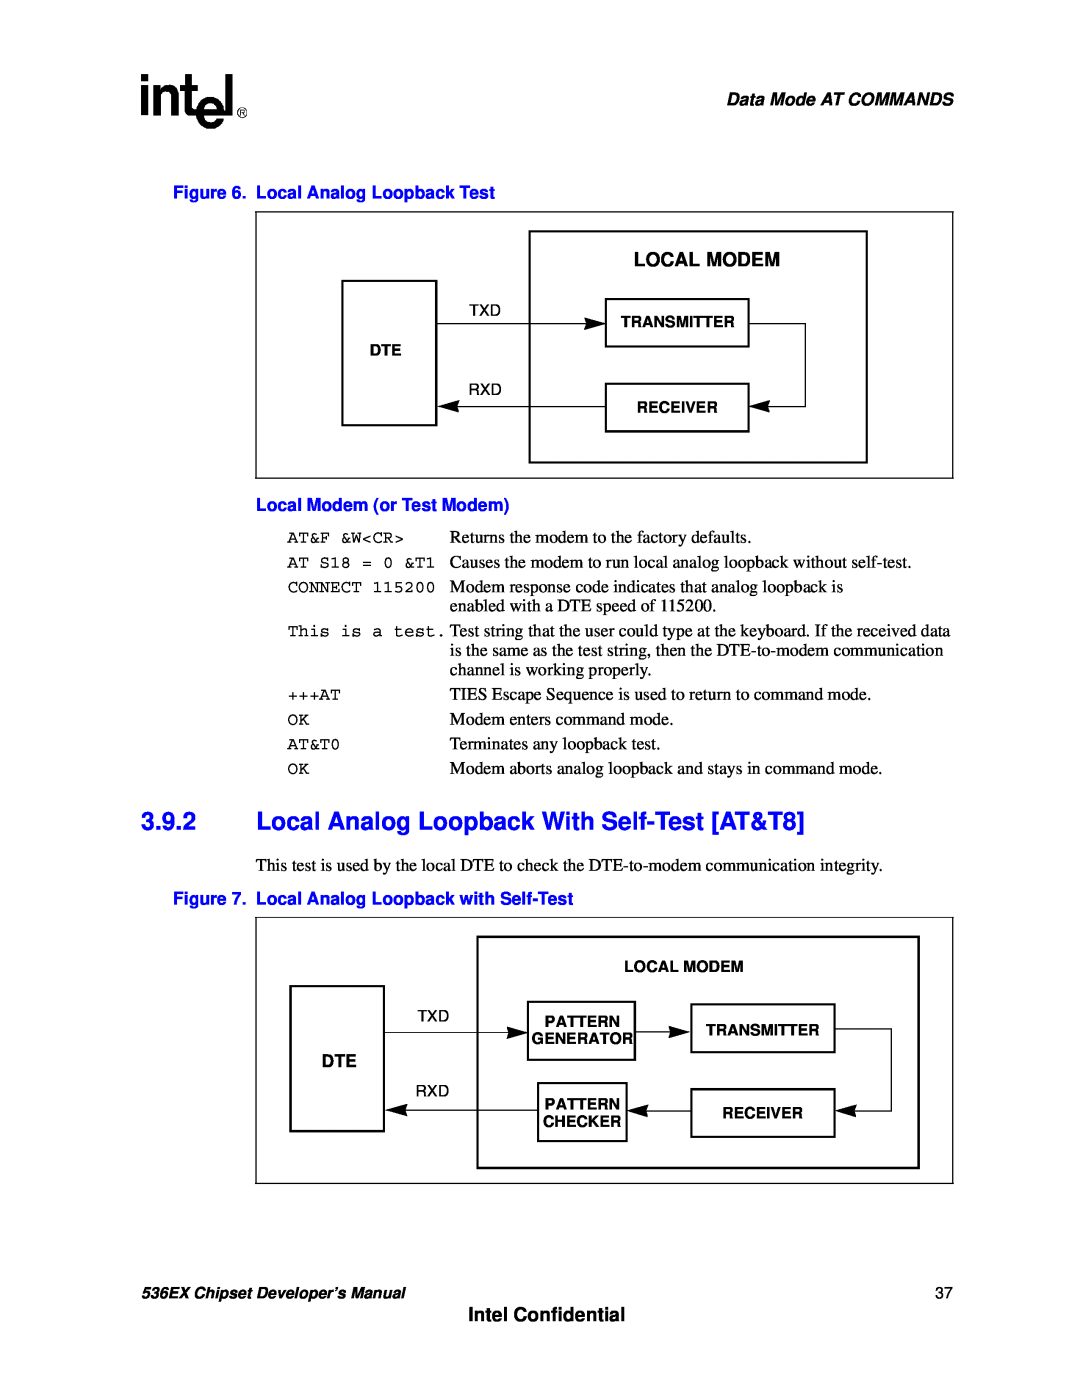 Intel 536EX manual 3.9.2Local Analog Loopback With Self-TestAT&T8, Intel Confidential, Local Modem, Data Mode AT COMMANDS 